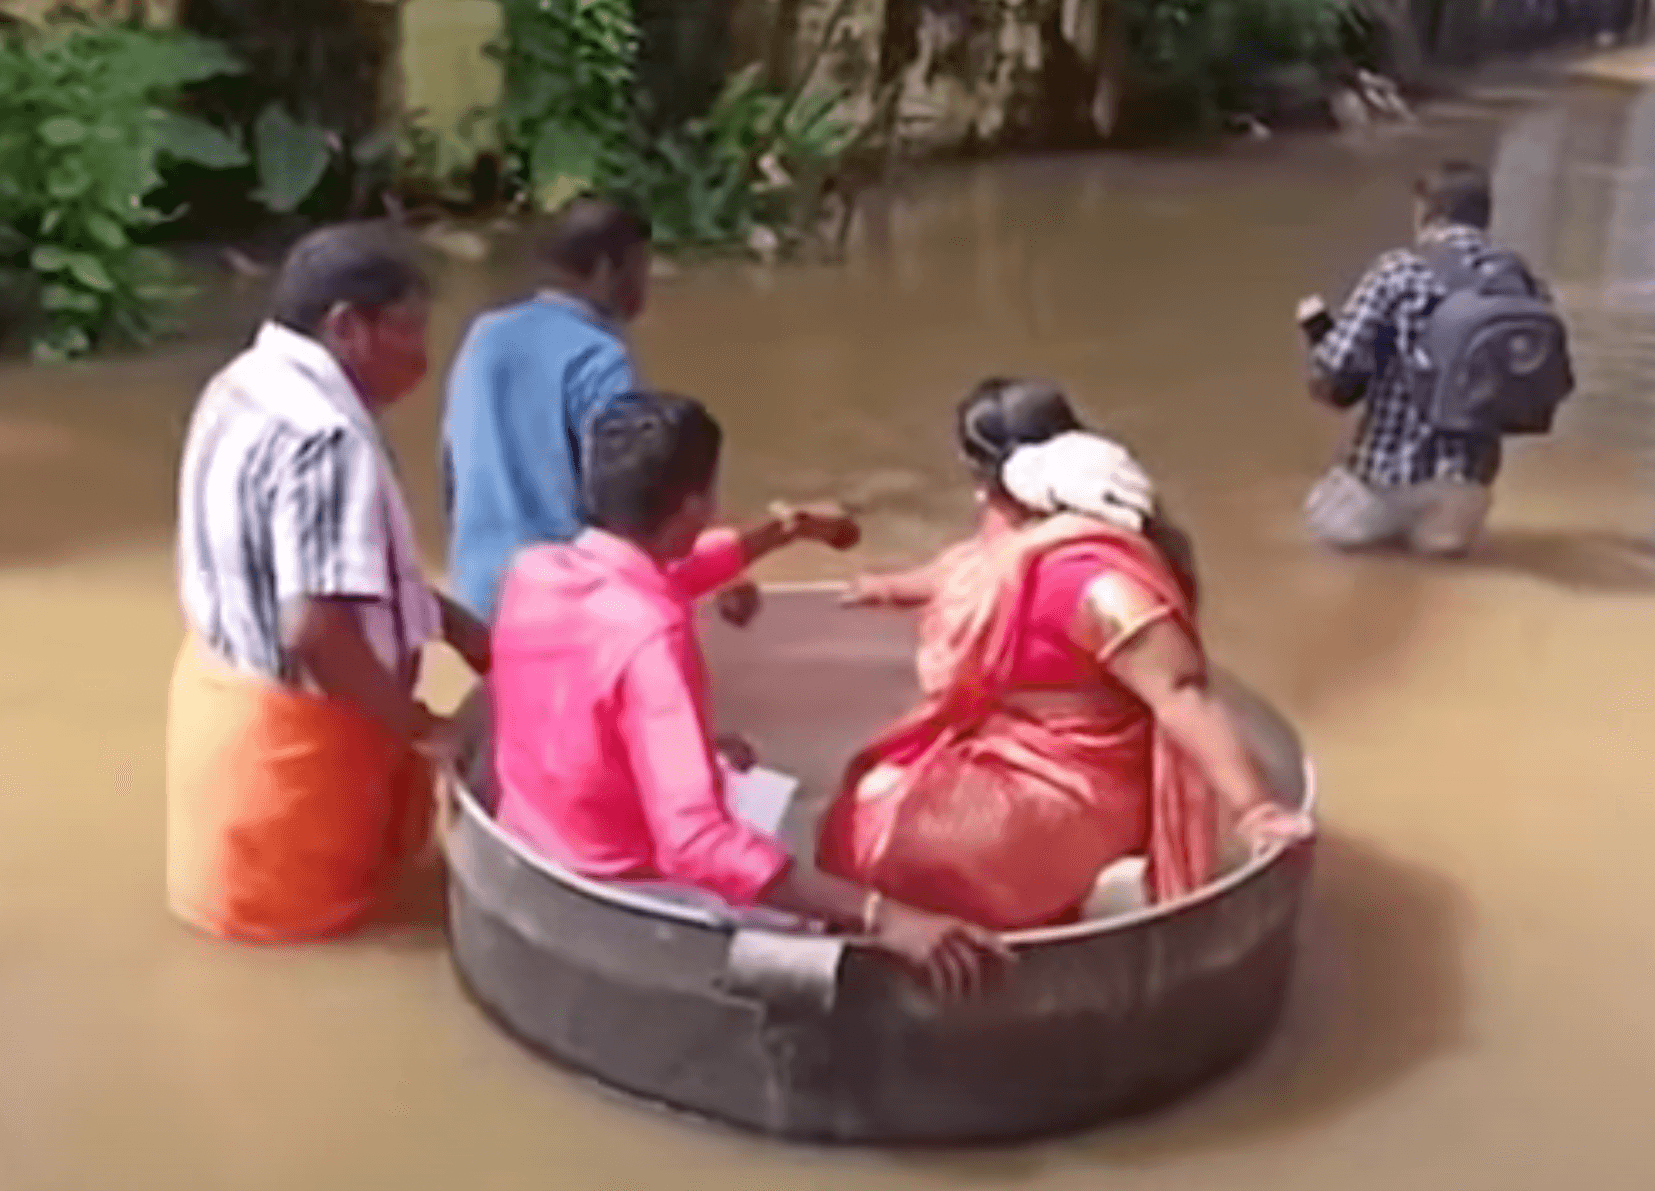 A video screenshot of a couple in India making their way to their wedding venue in a huge cooking pot, as heavy rains flood the southern state of Kerala.